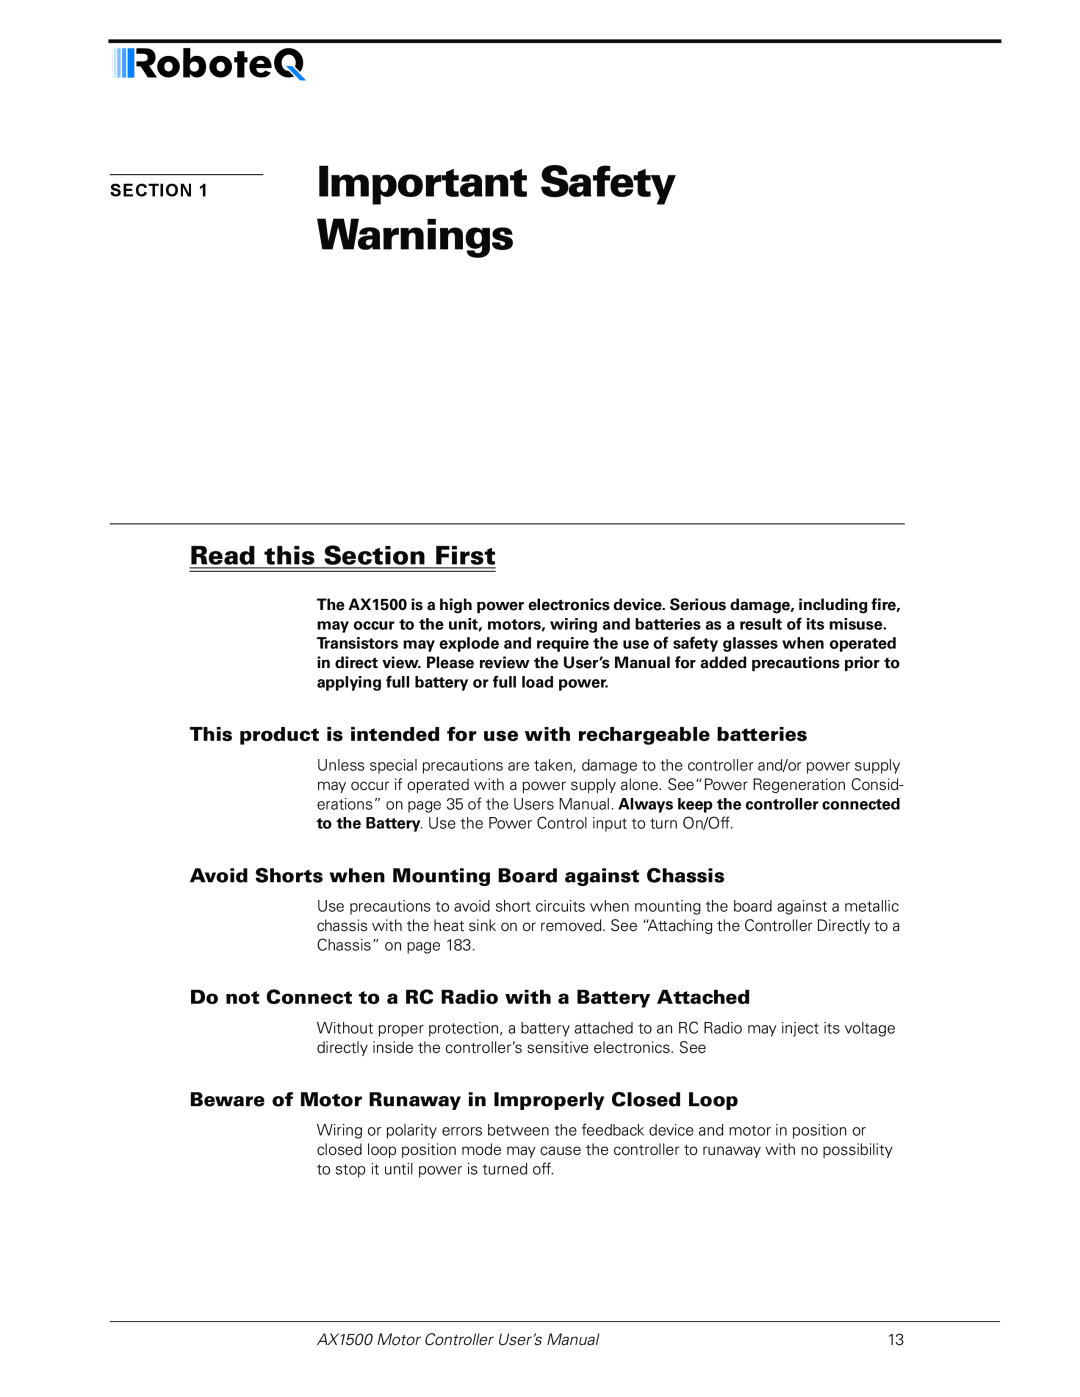 RoboteQ AX1500 Important Safety, Warnings, Read this Section First, Avoid Shorts when Mounting Board against Chassis 